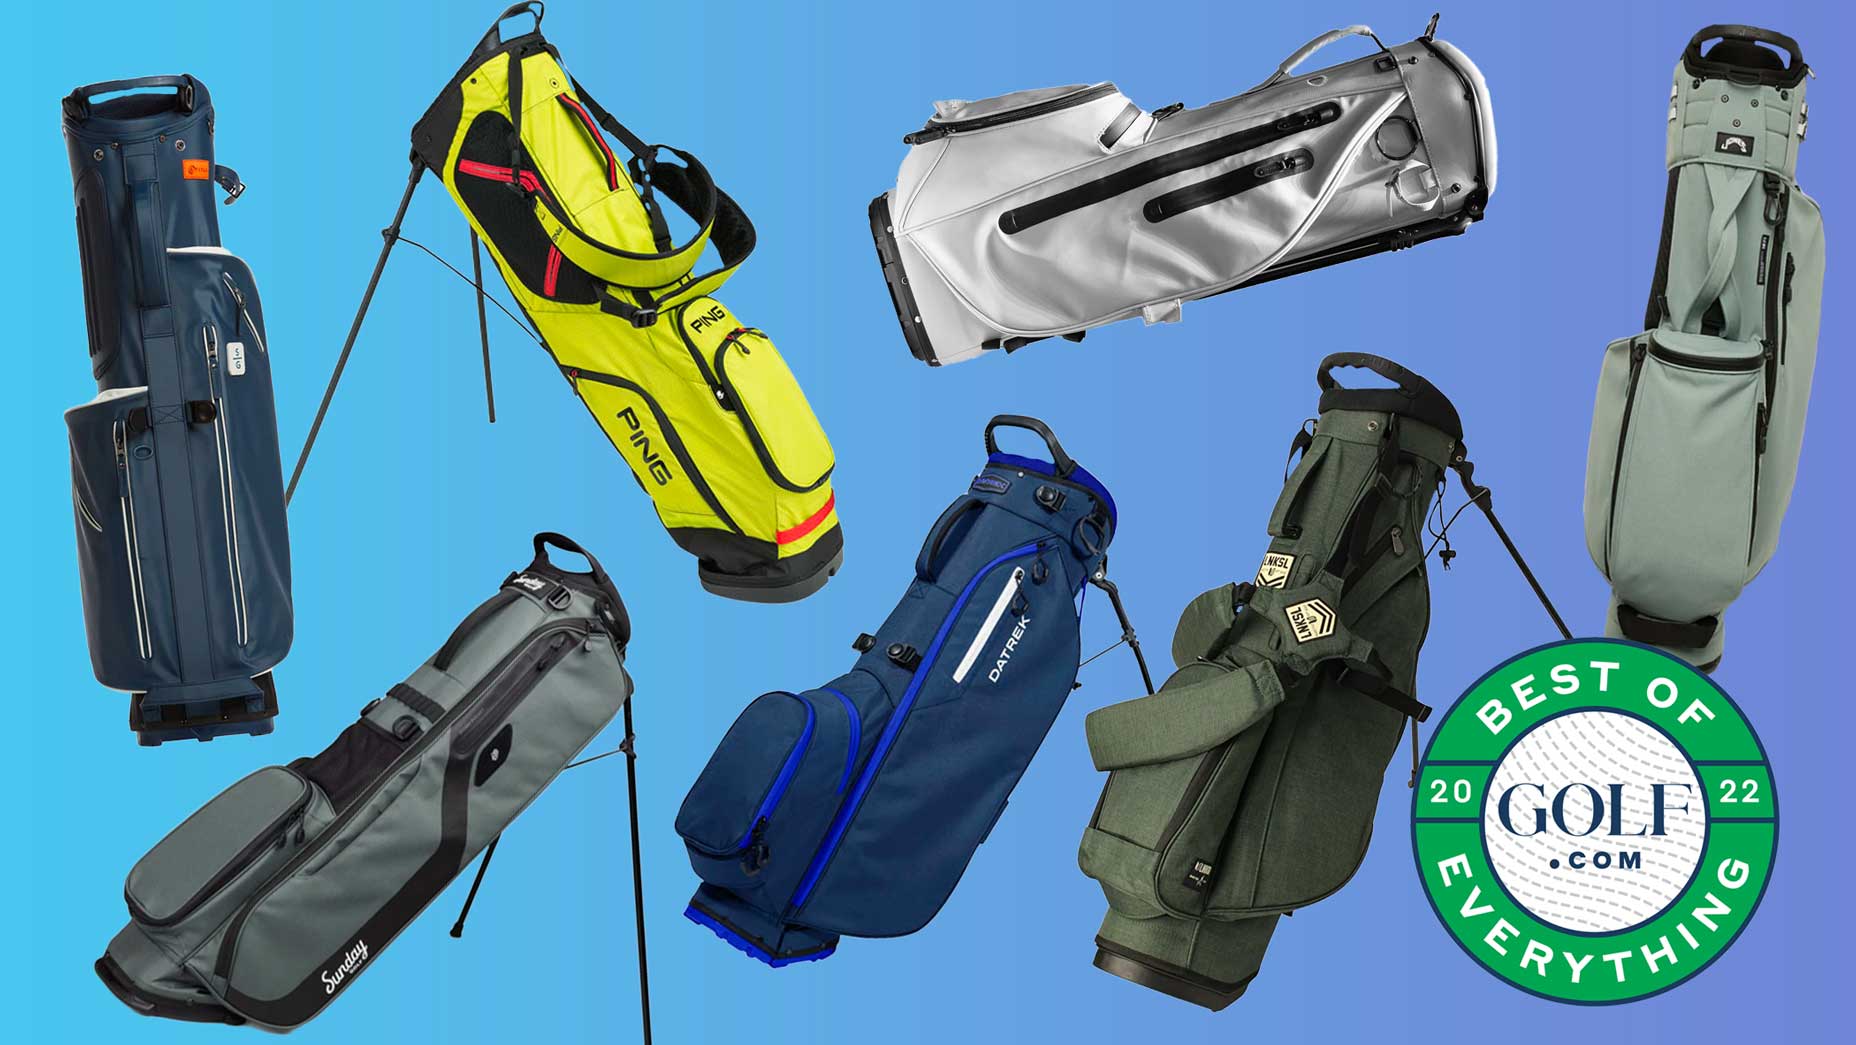 Best Golf Bags 2022 The 10 best golf bags for walkers BVM Sports